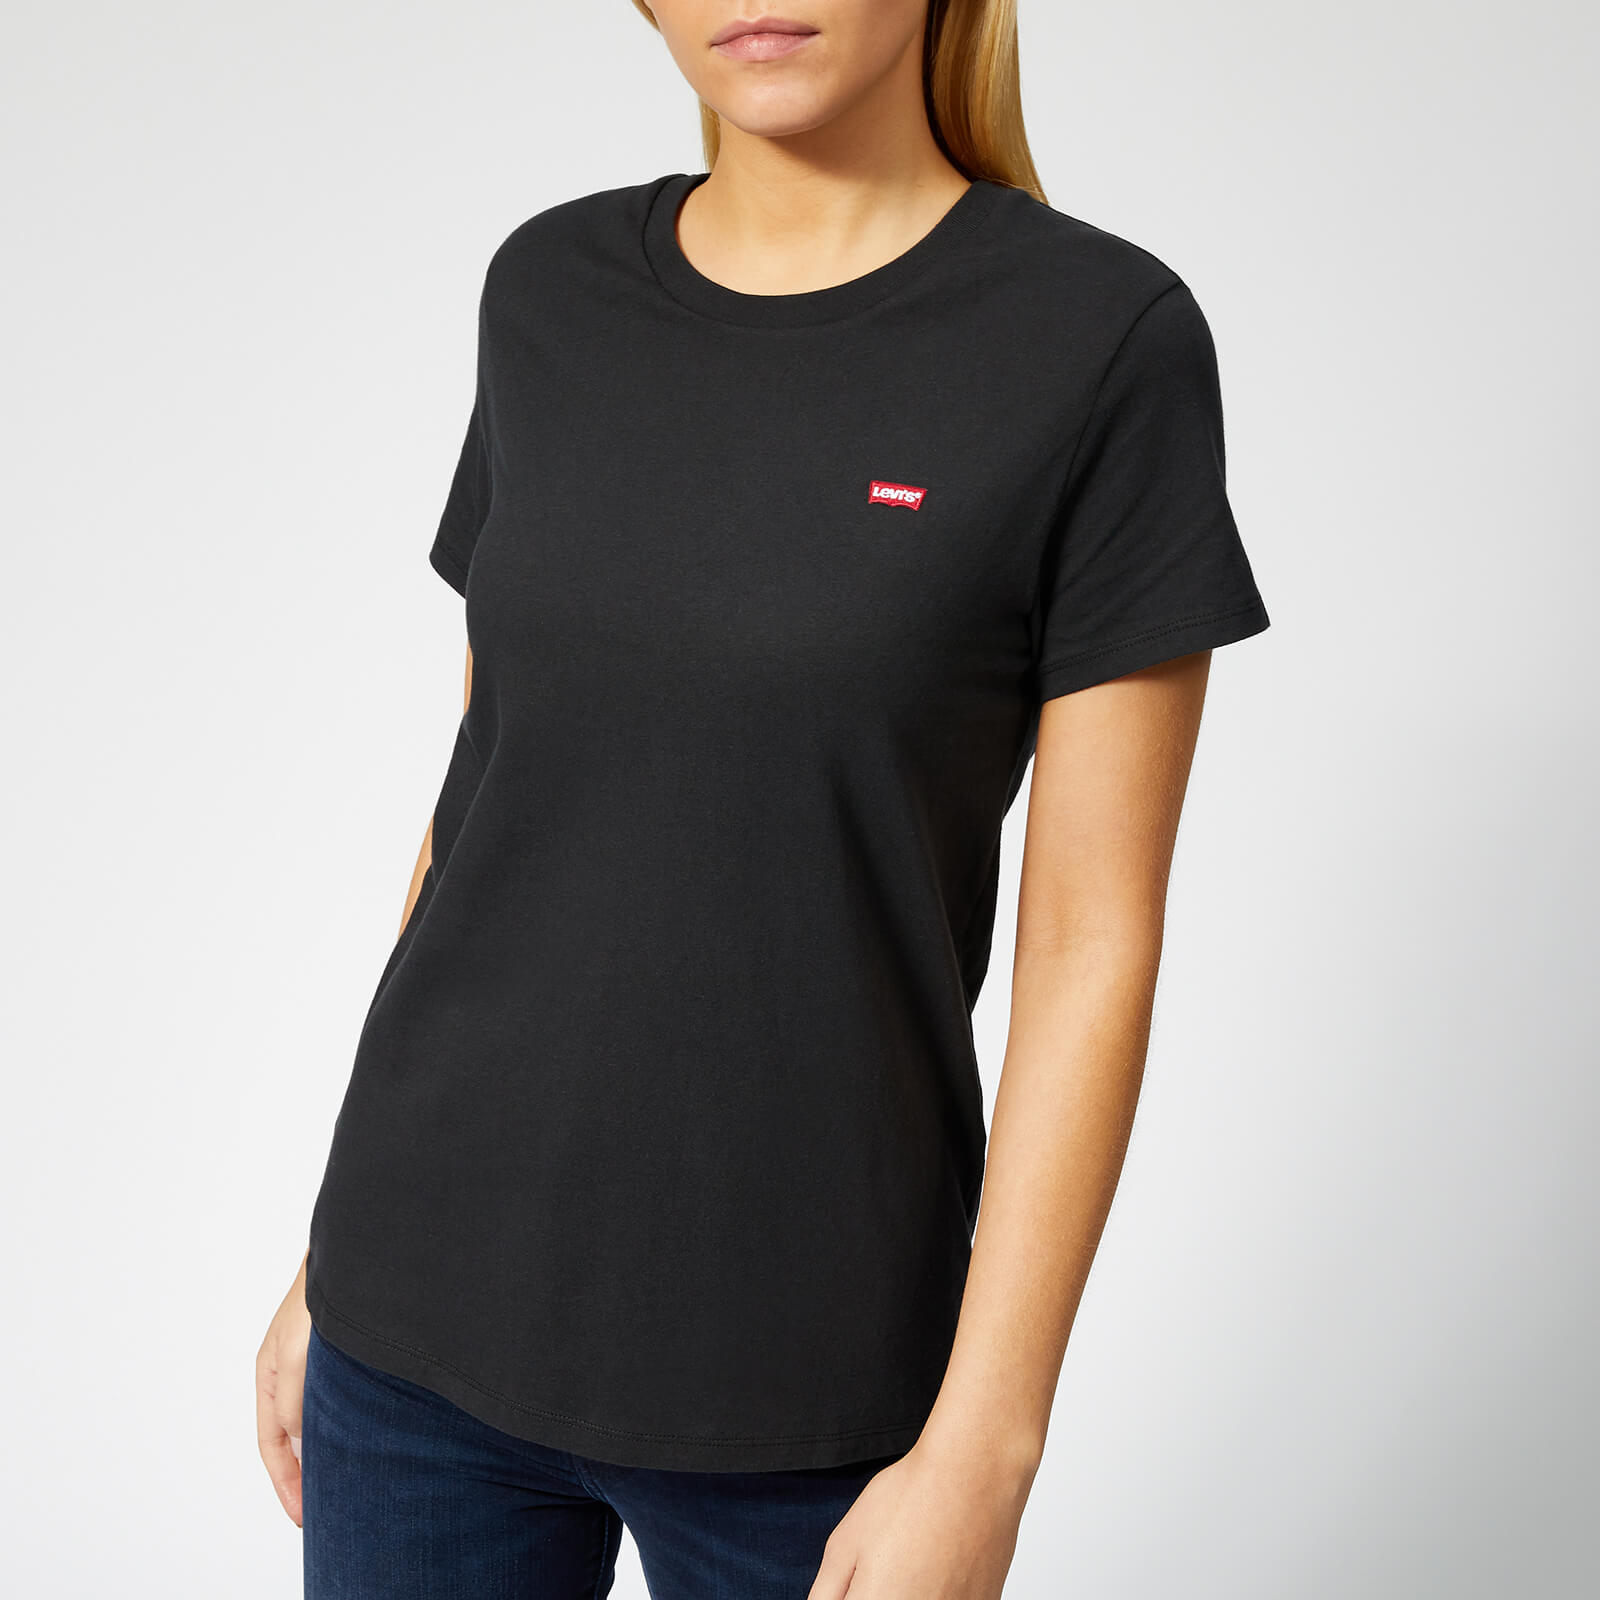 levis t shirt perfect tee